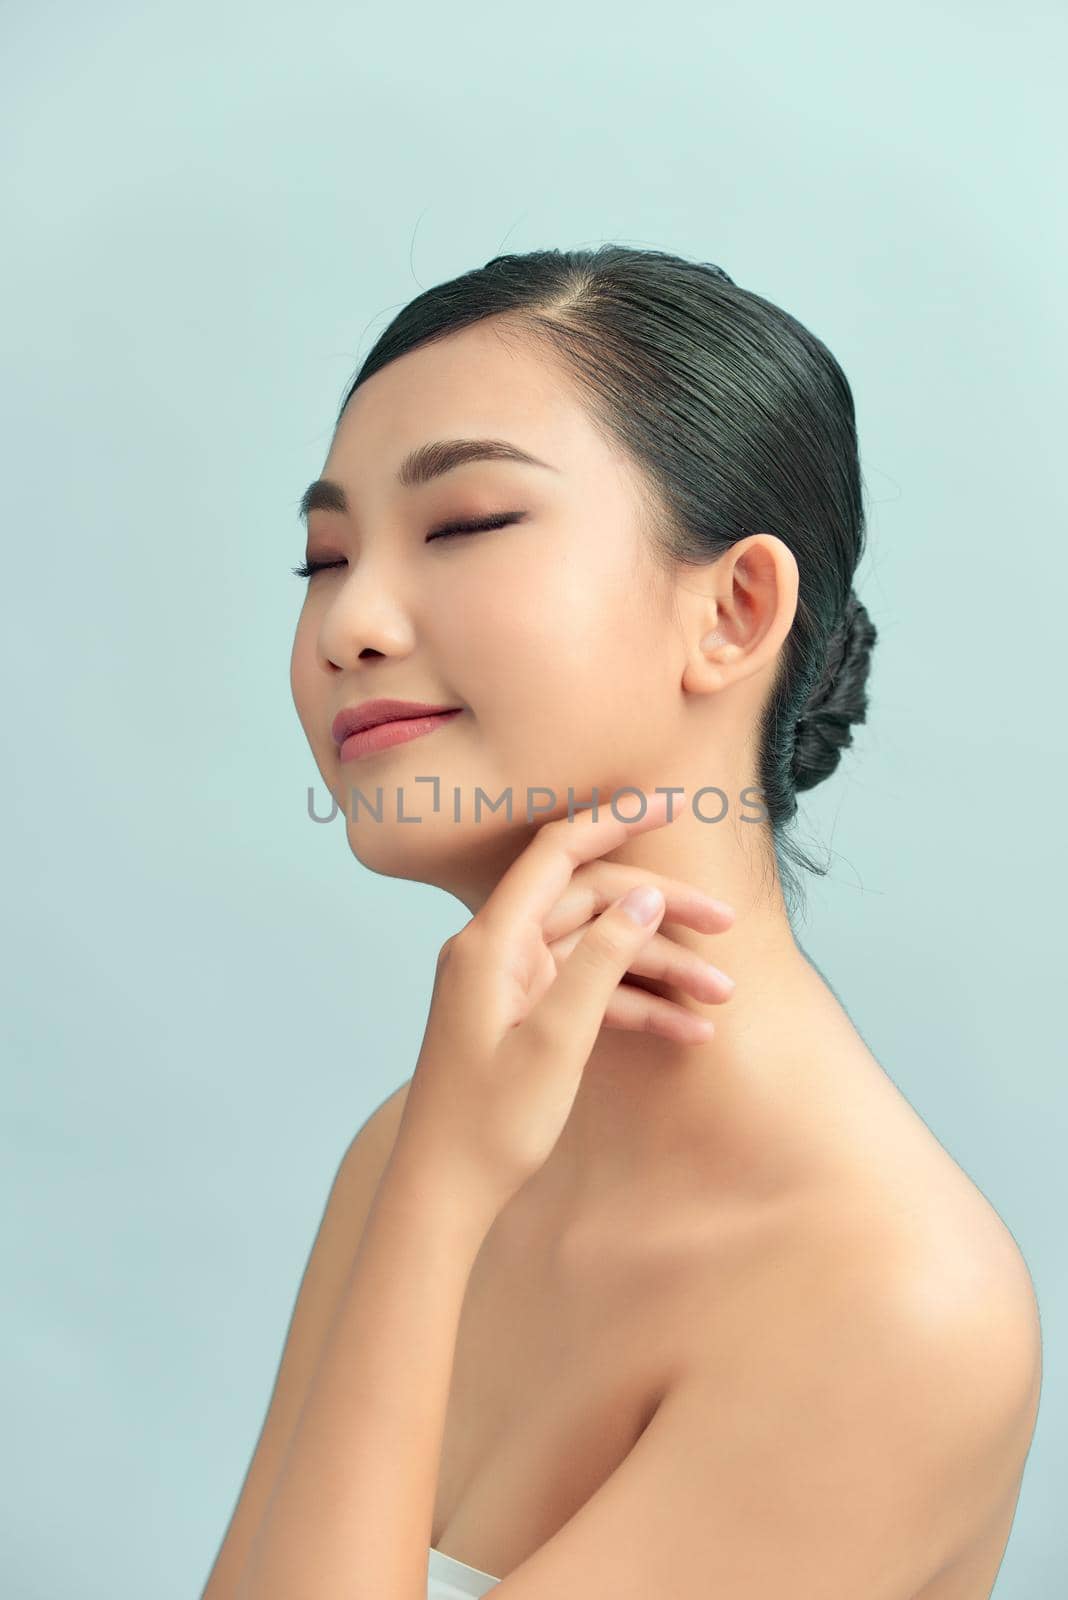 Closeup portrait of beauty asian woman with fair perfect healthy glow skin hand touching shoulder copy space,